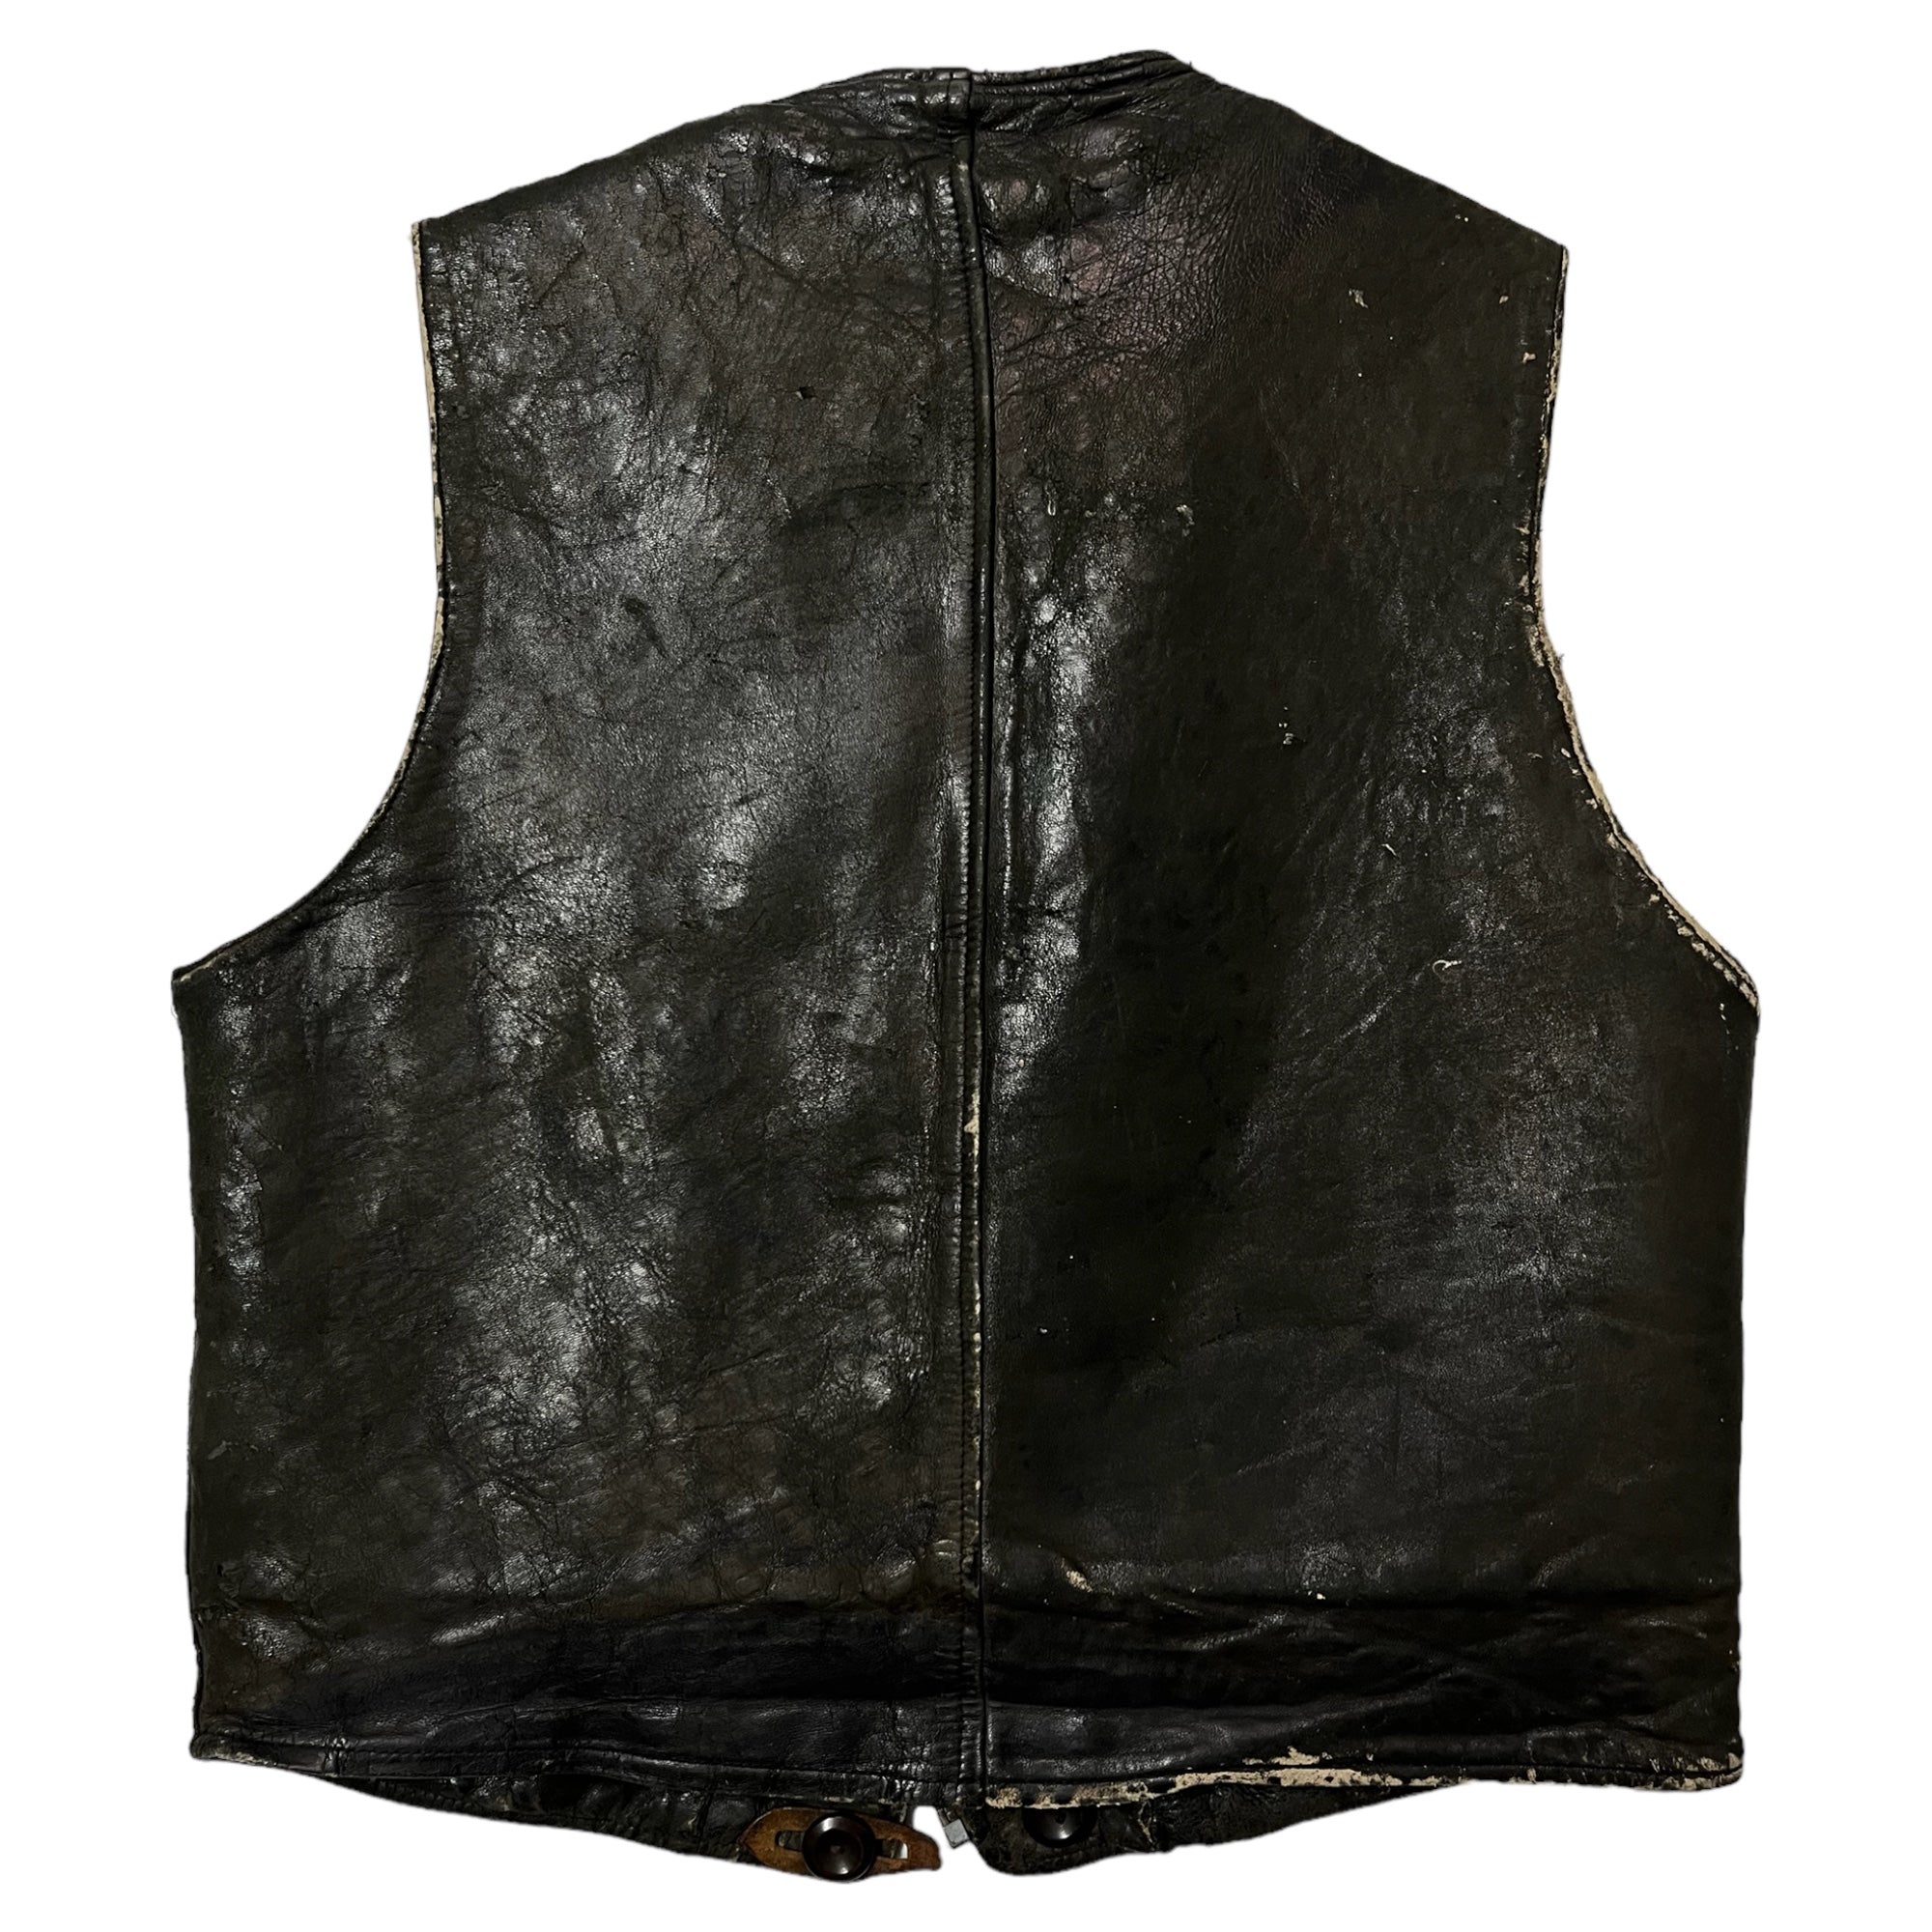 1930s Leather Shearling-Lined Vest with Fishing-Line Repair - Distressed Black - XS/S